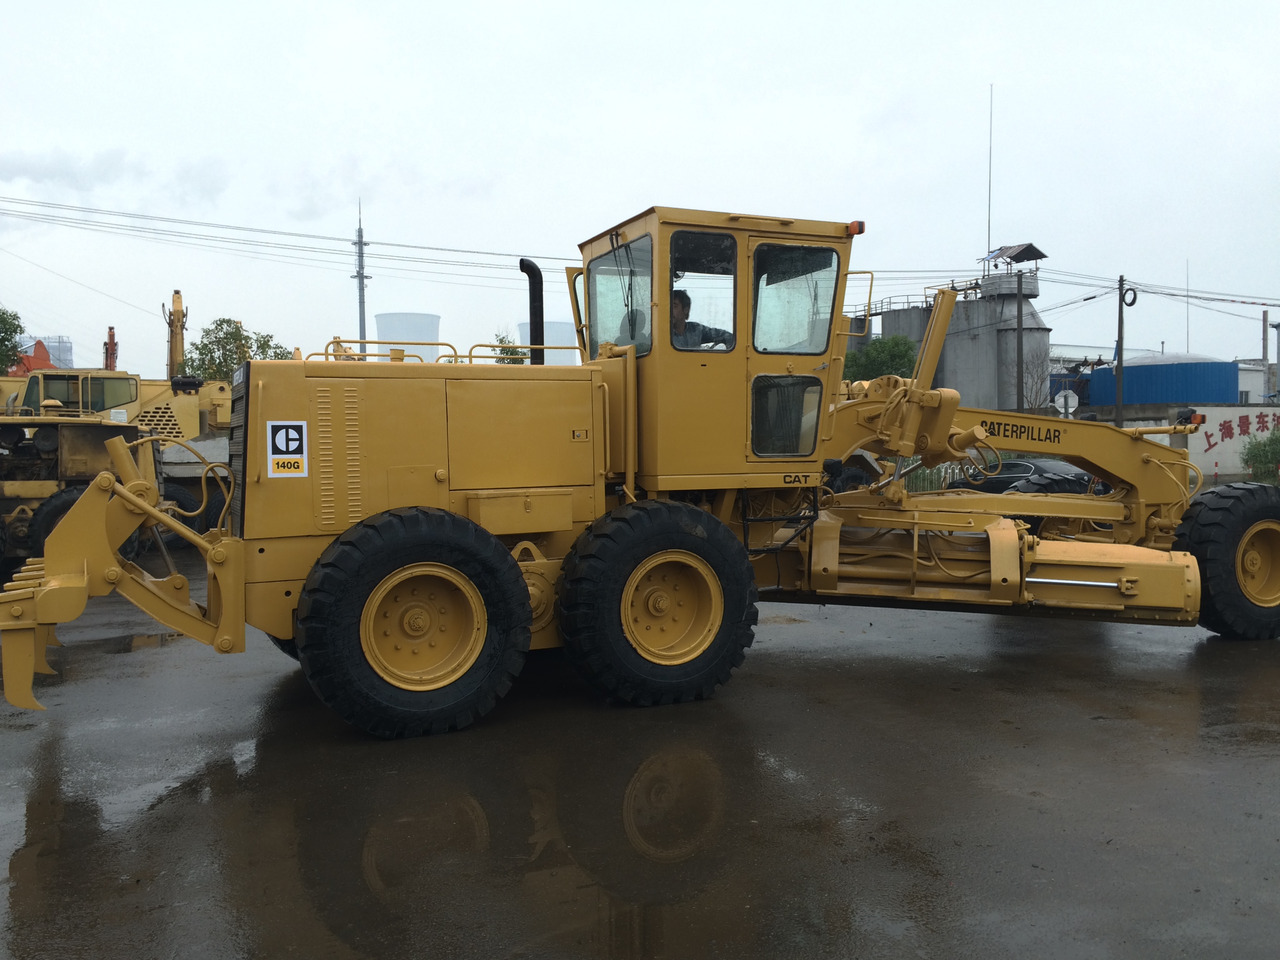 Niveleuse neuf Hot sale Famous  brand  CATERPILLAR 140G  in good condition in China: photos 2